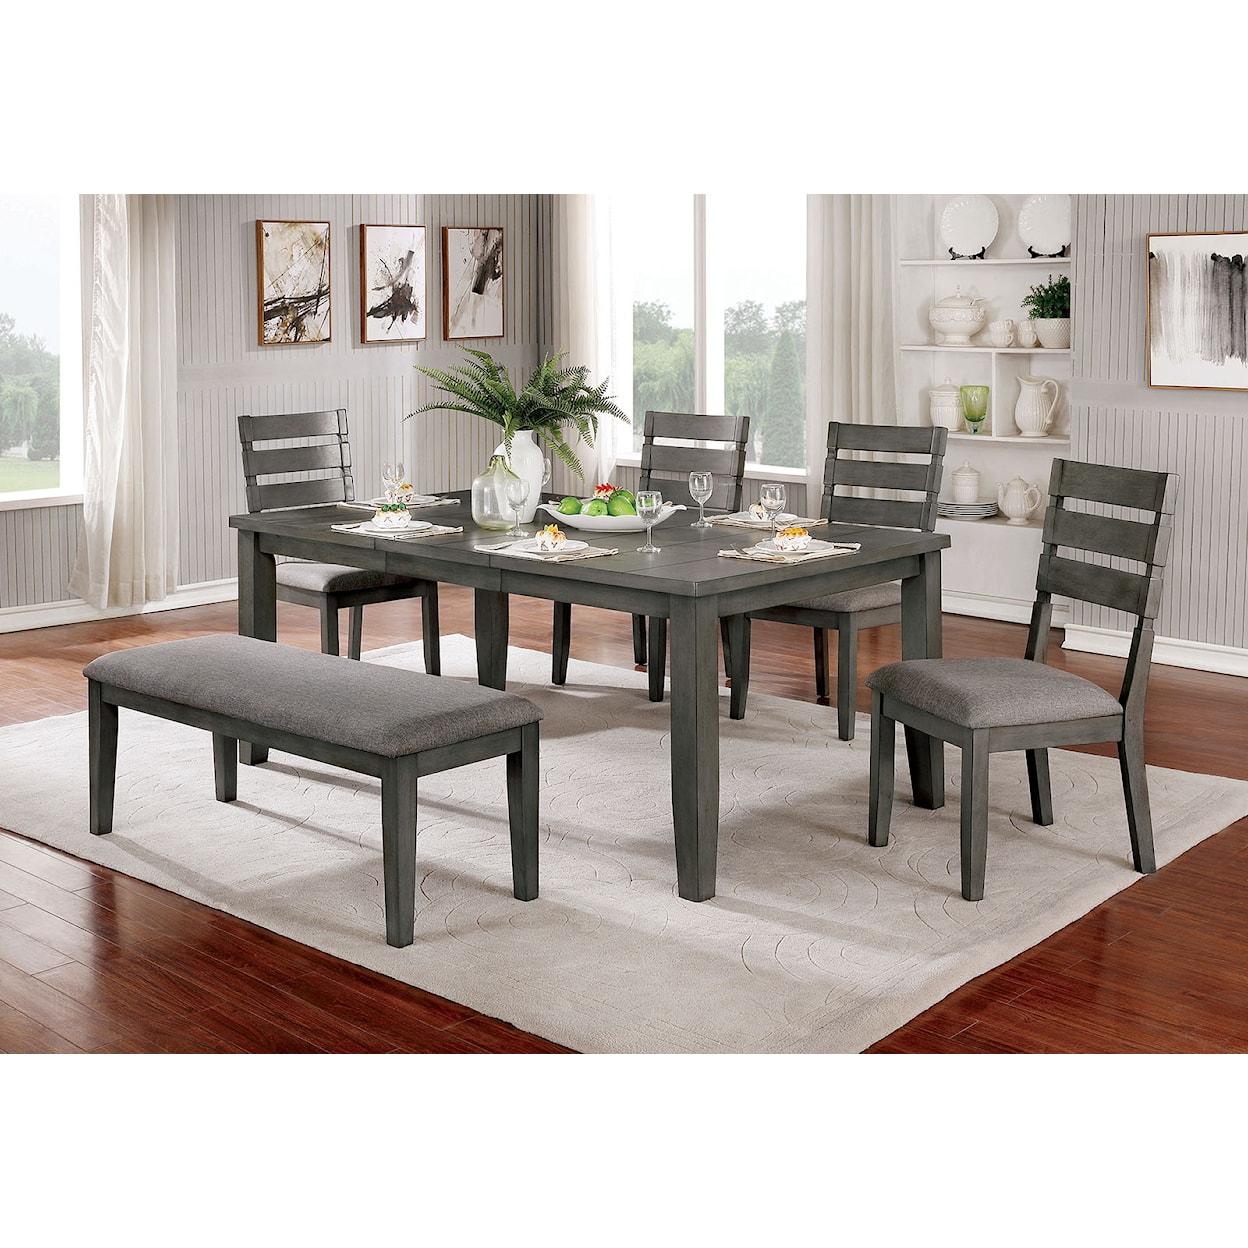 Furniture of America Viana Dining Table